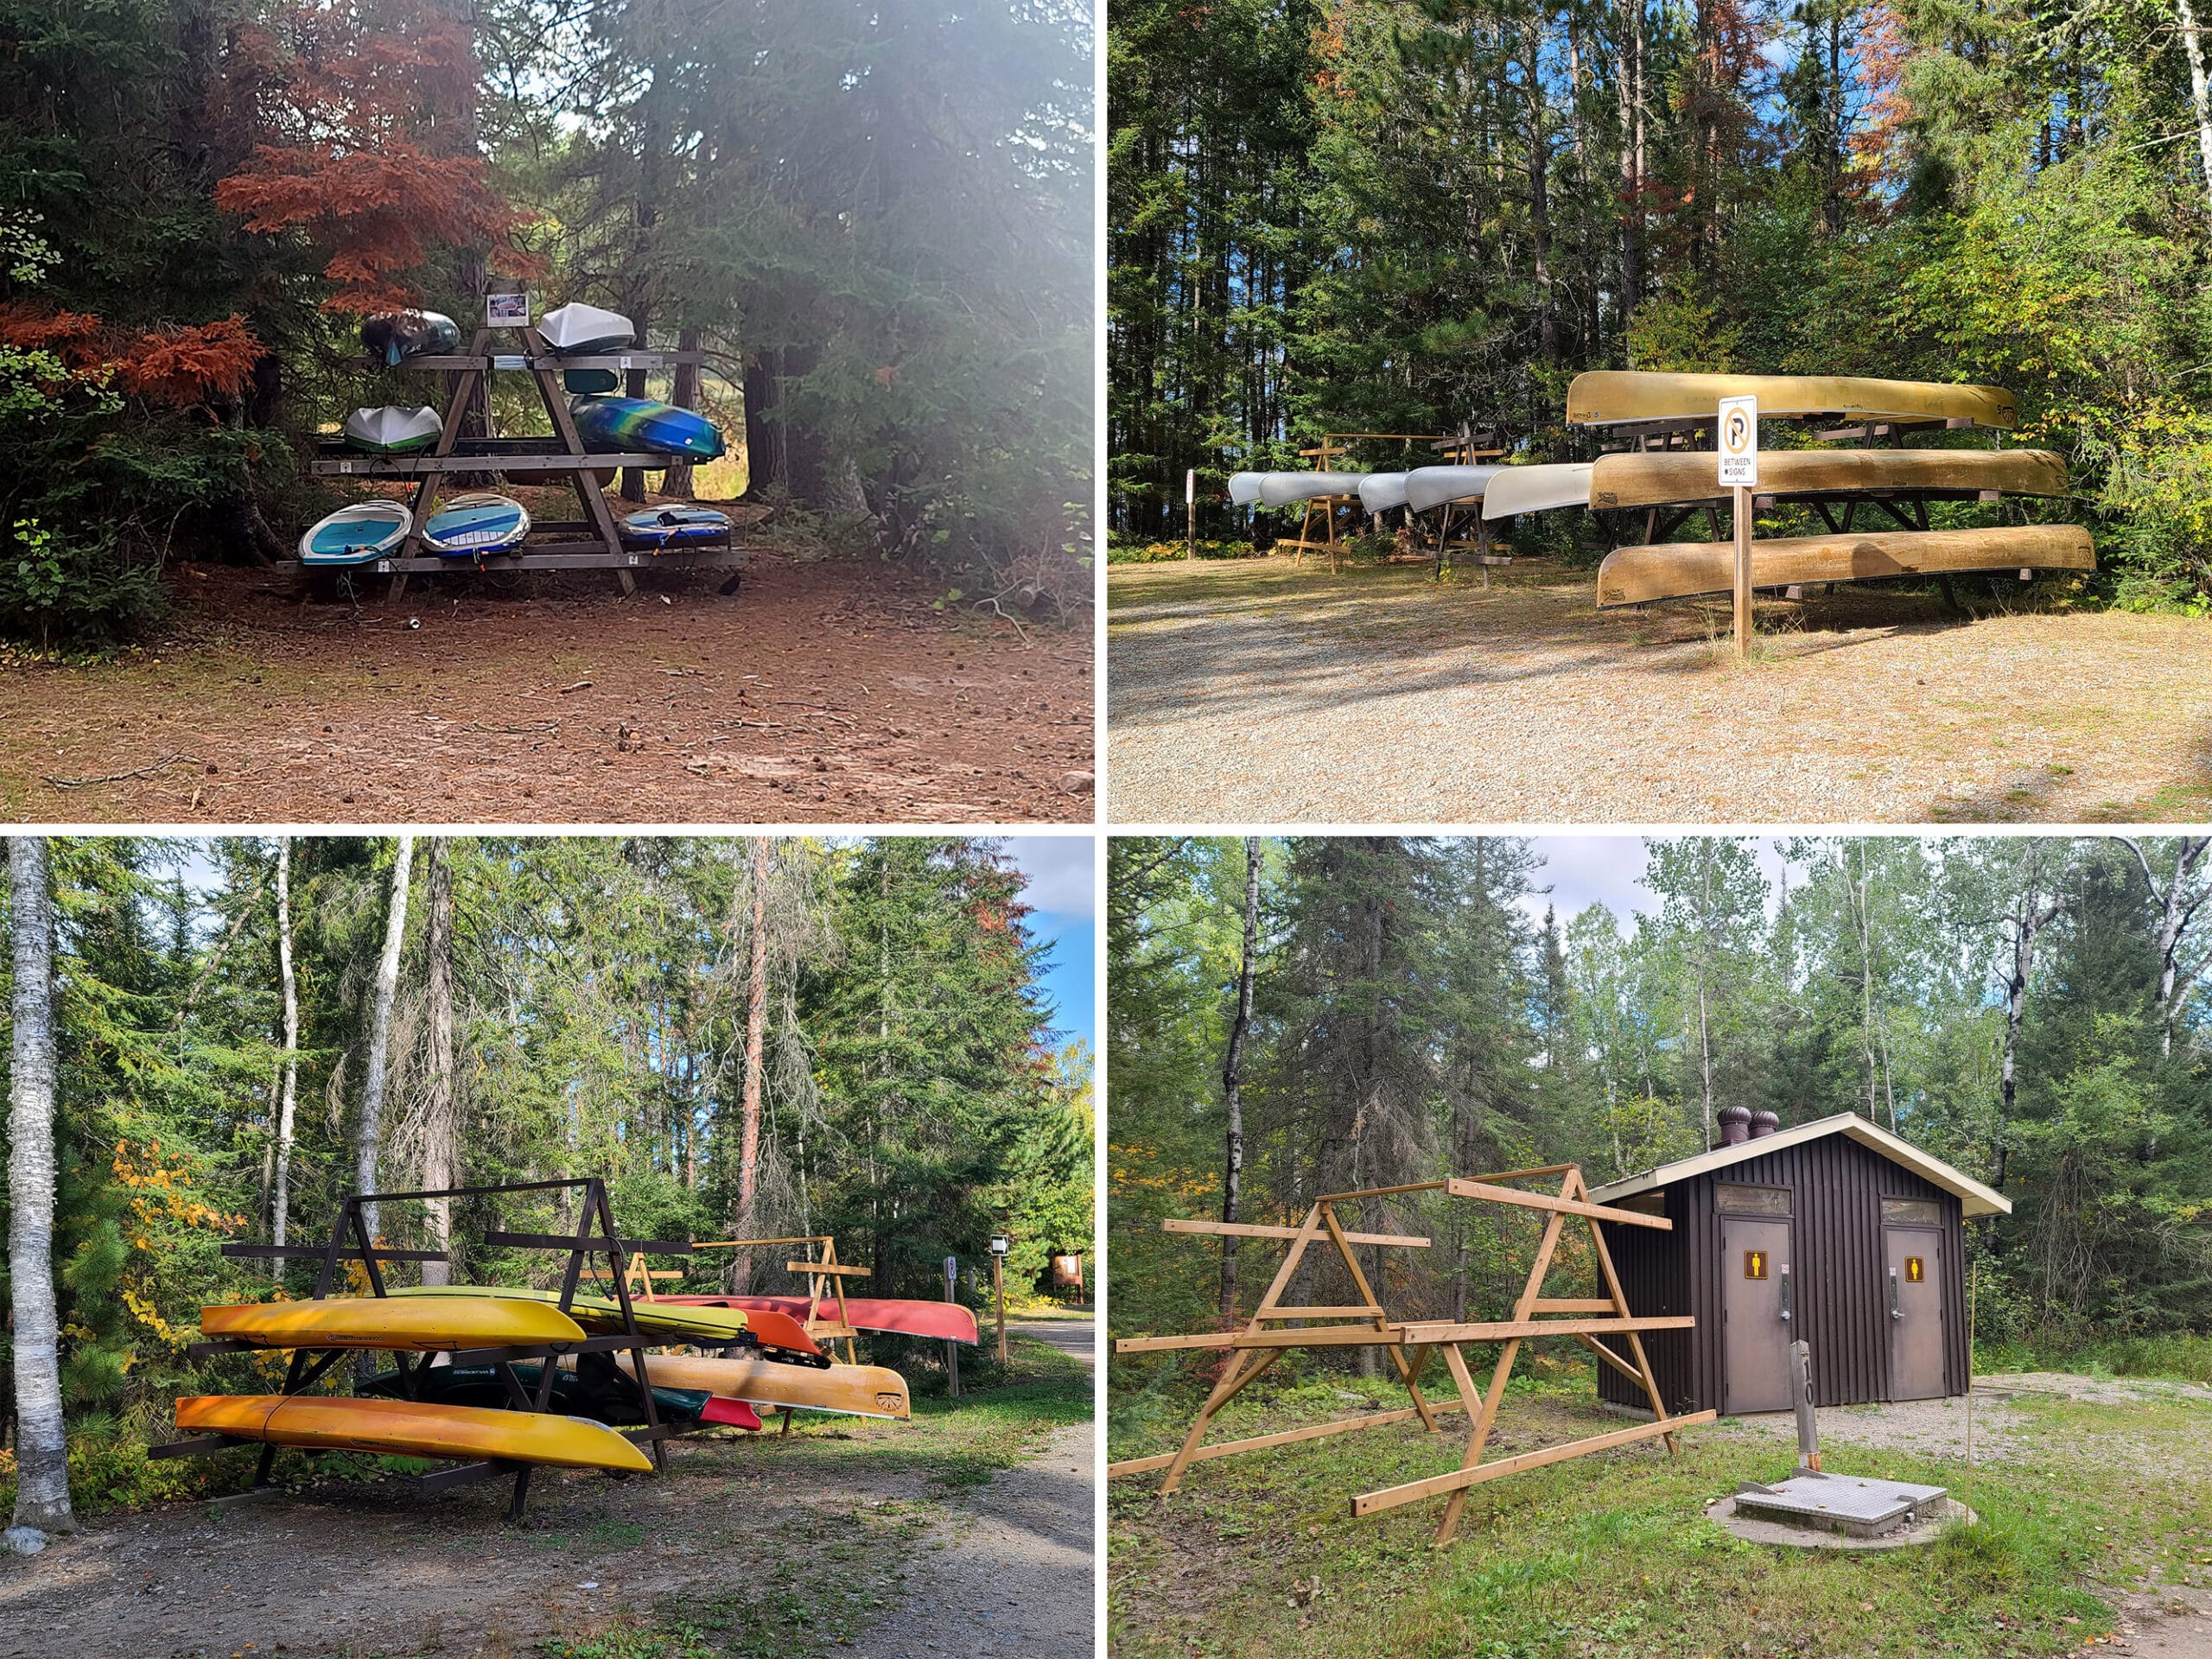 4 part image showing canoe racks with canoes in various spots throughout the park.